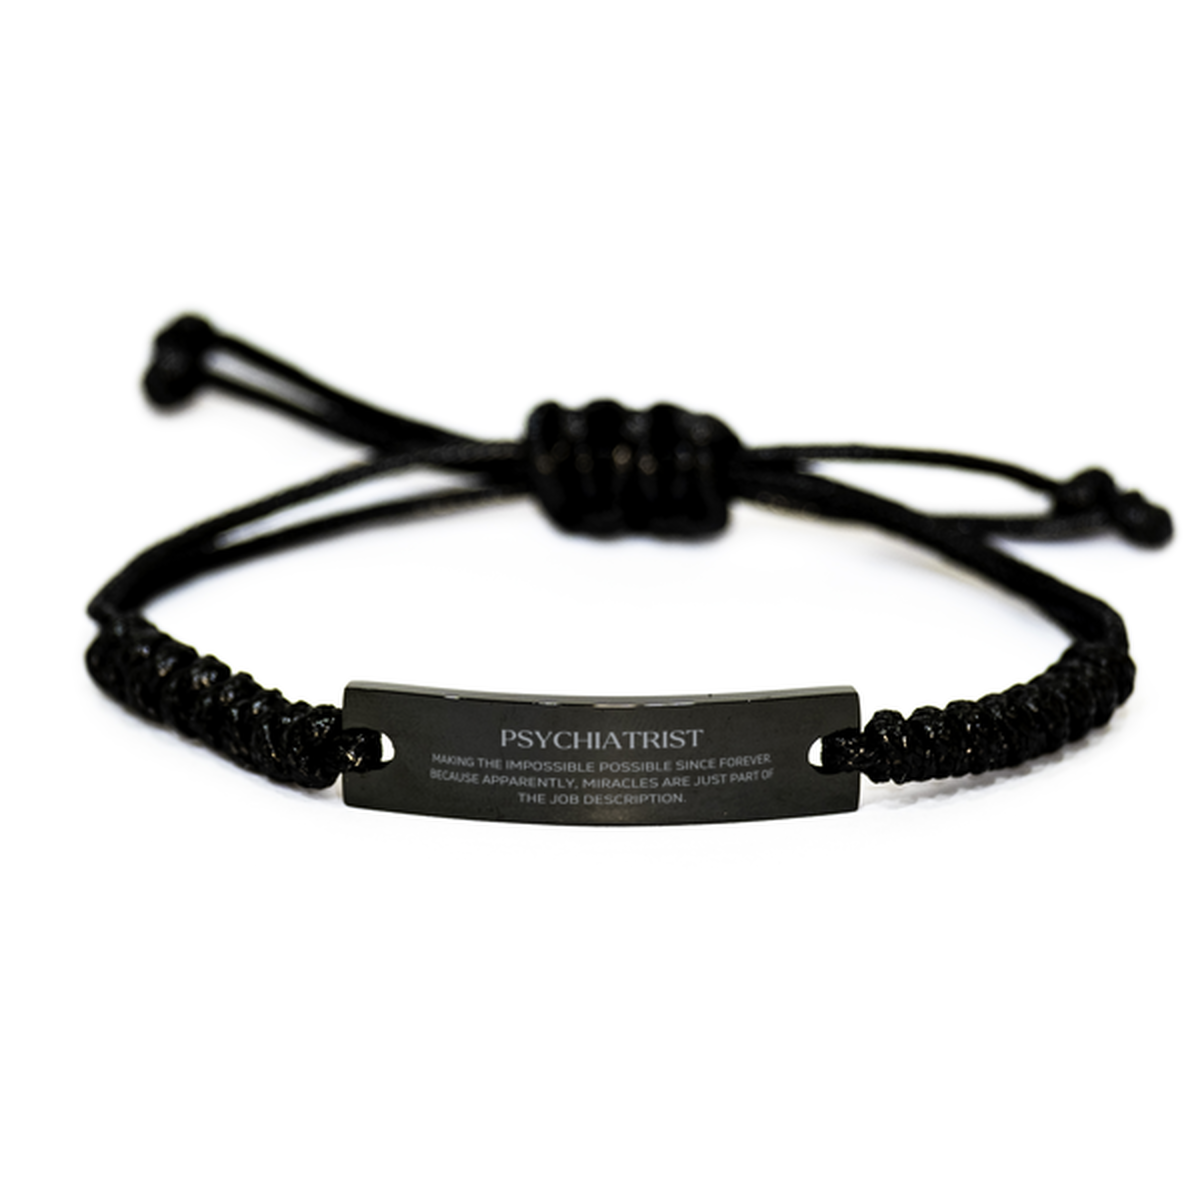 Funny Psychiatrist Gifts, Miracles are just part of the job description, Inspirational Birthday Black Rope Bracelet For Psychiatrist, Men, Women, Coworkers, Friends, Boss